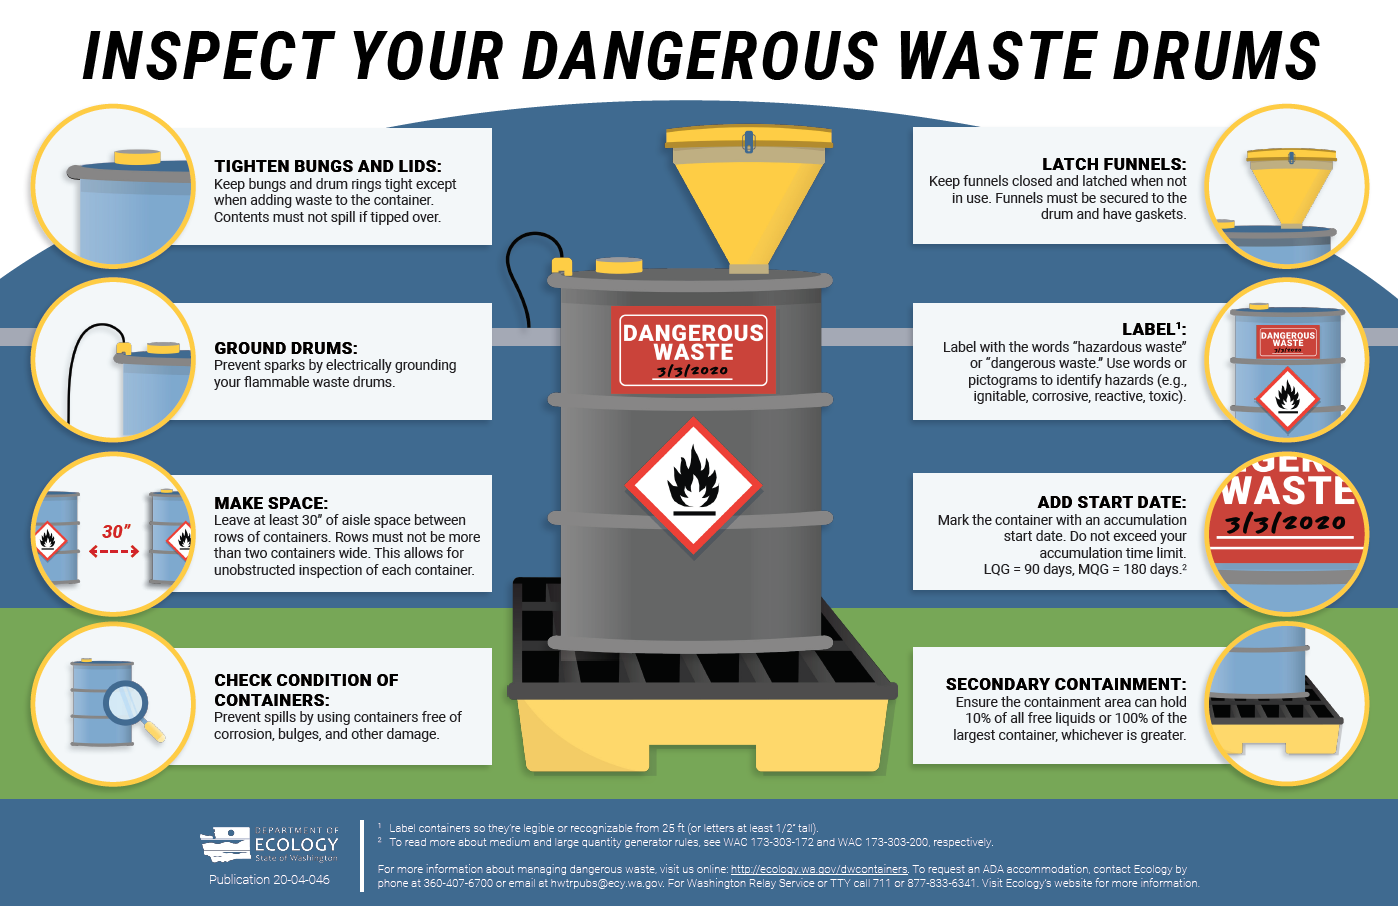 Inspect your dangerous waste drums poster